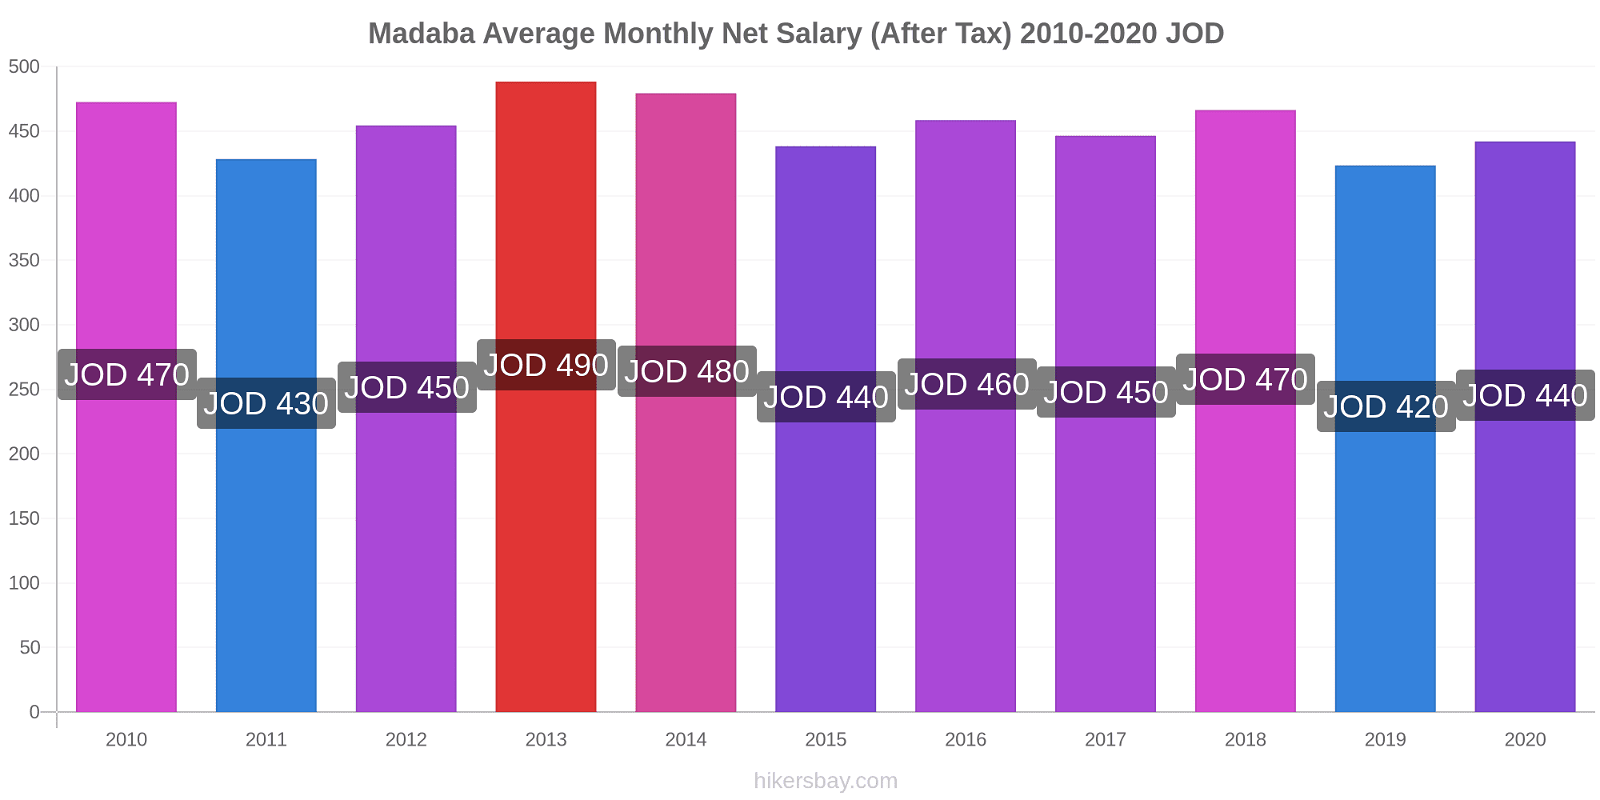 Madaba price changes Average Monthly Net Salary (After Tax) hikersbay.com